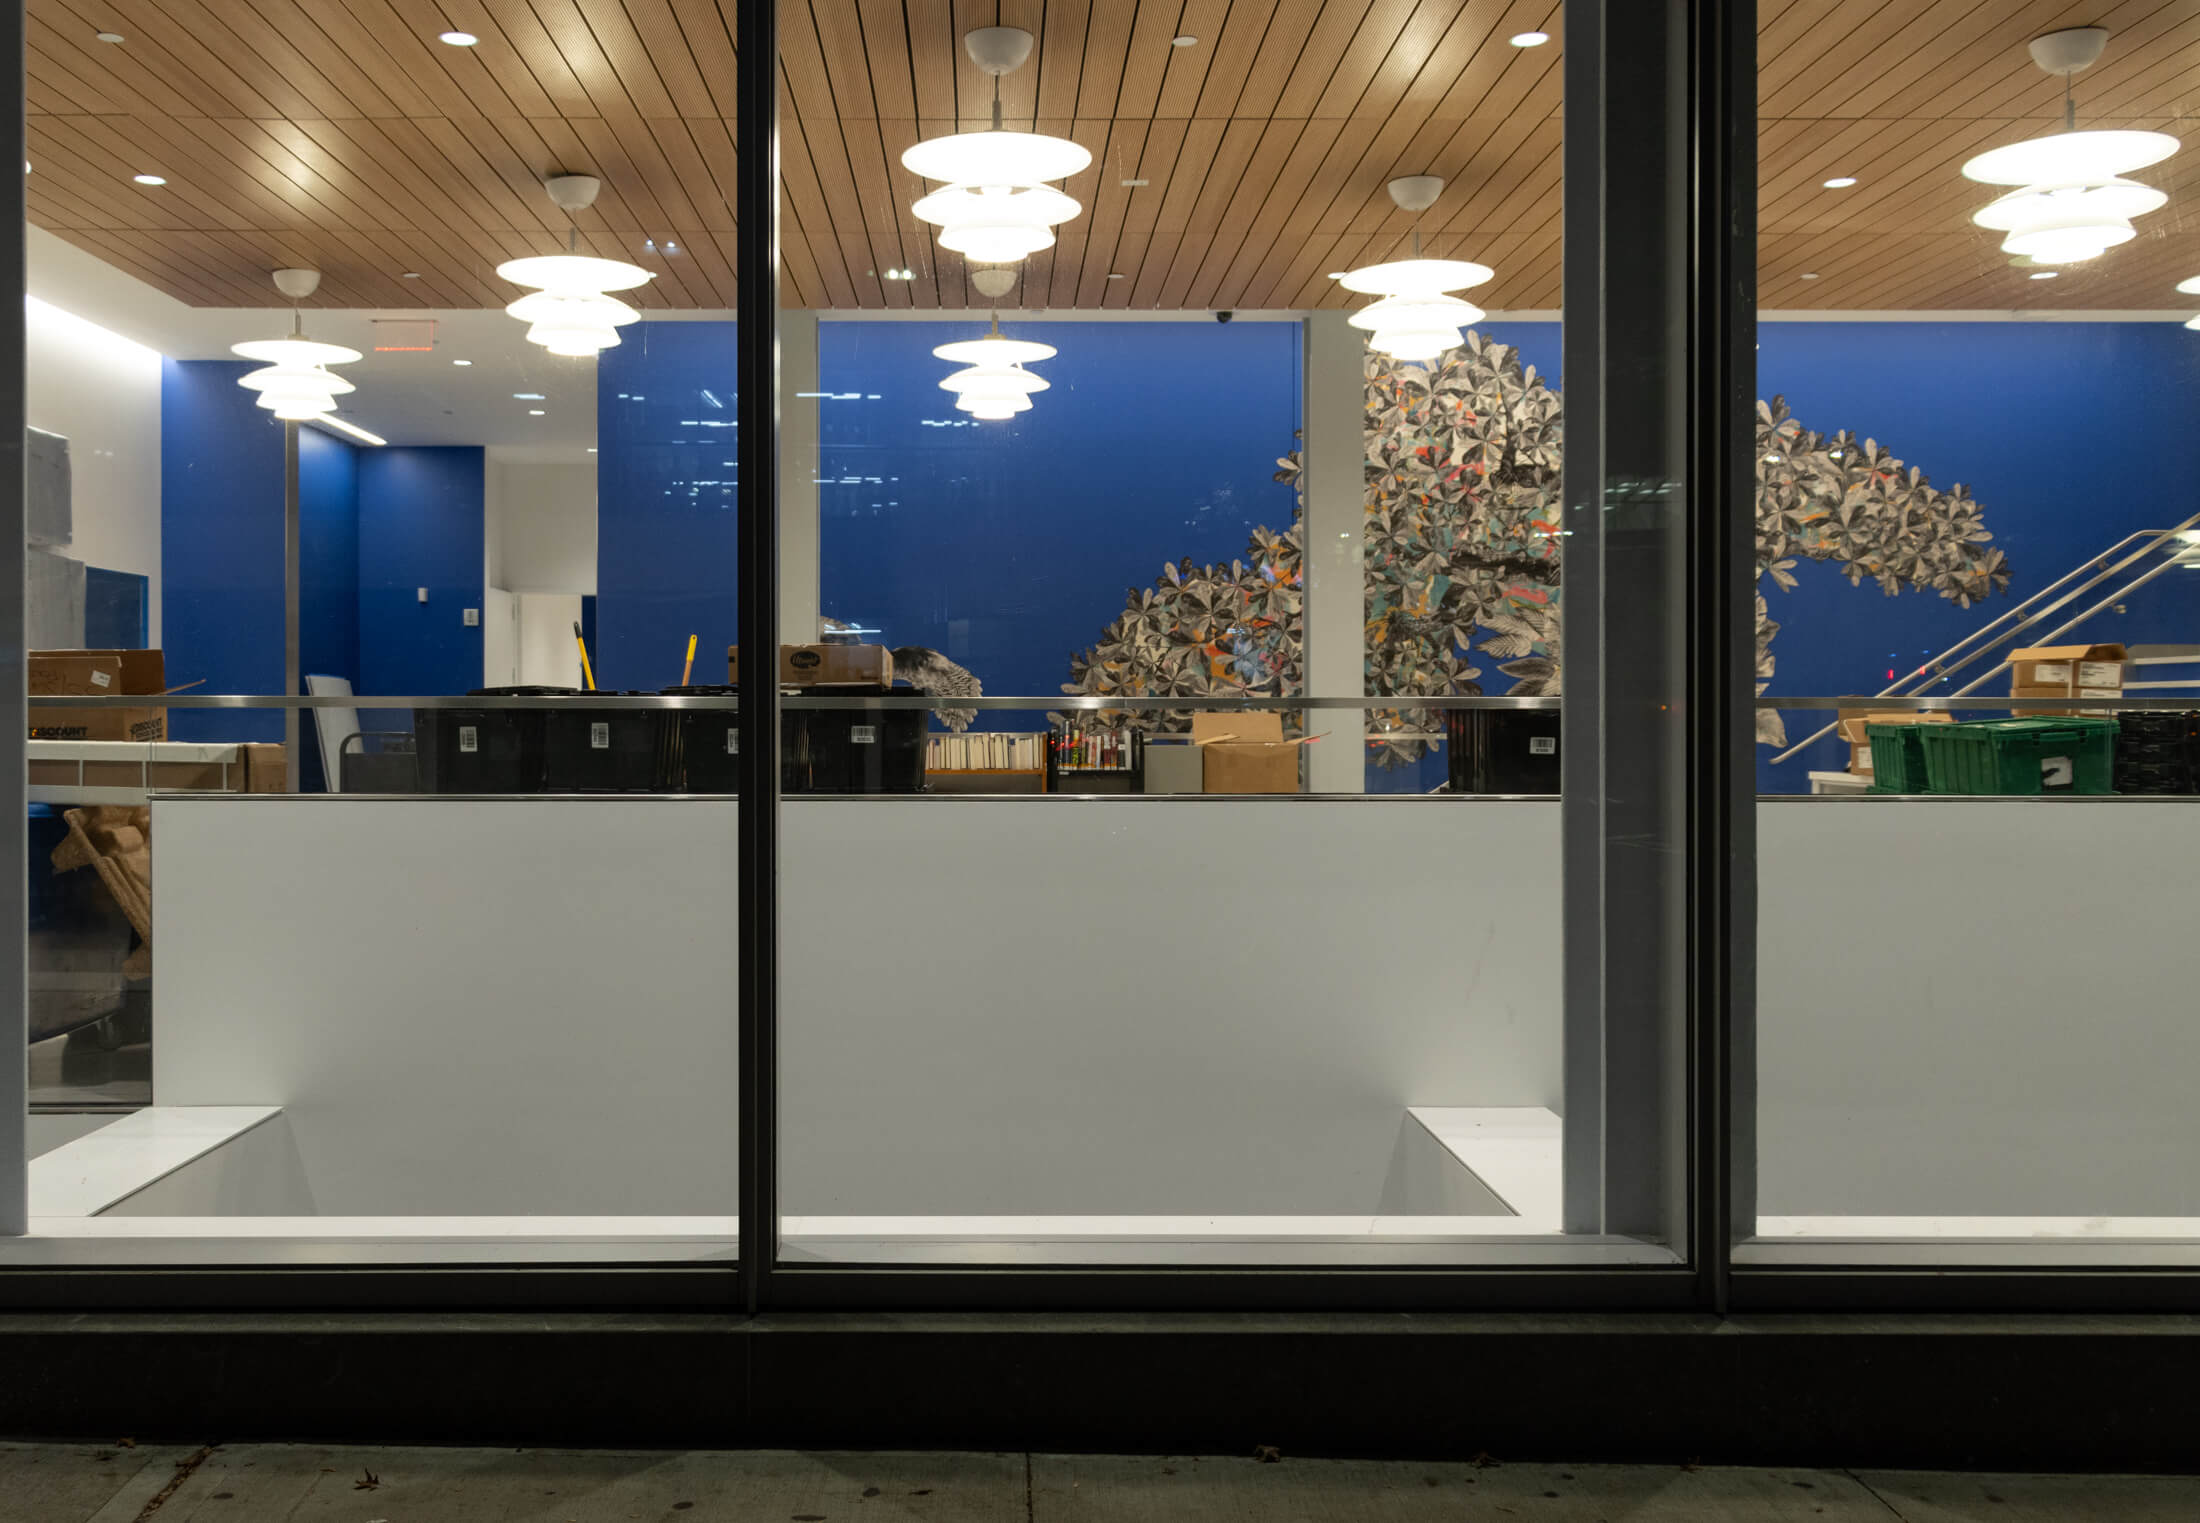 a look through the first floor windows shows artwork and a blue wall